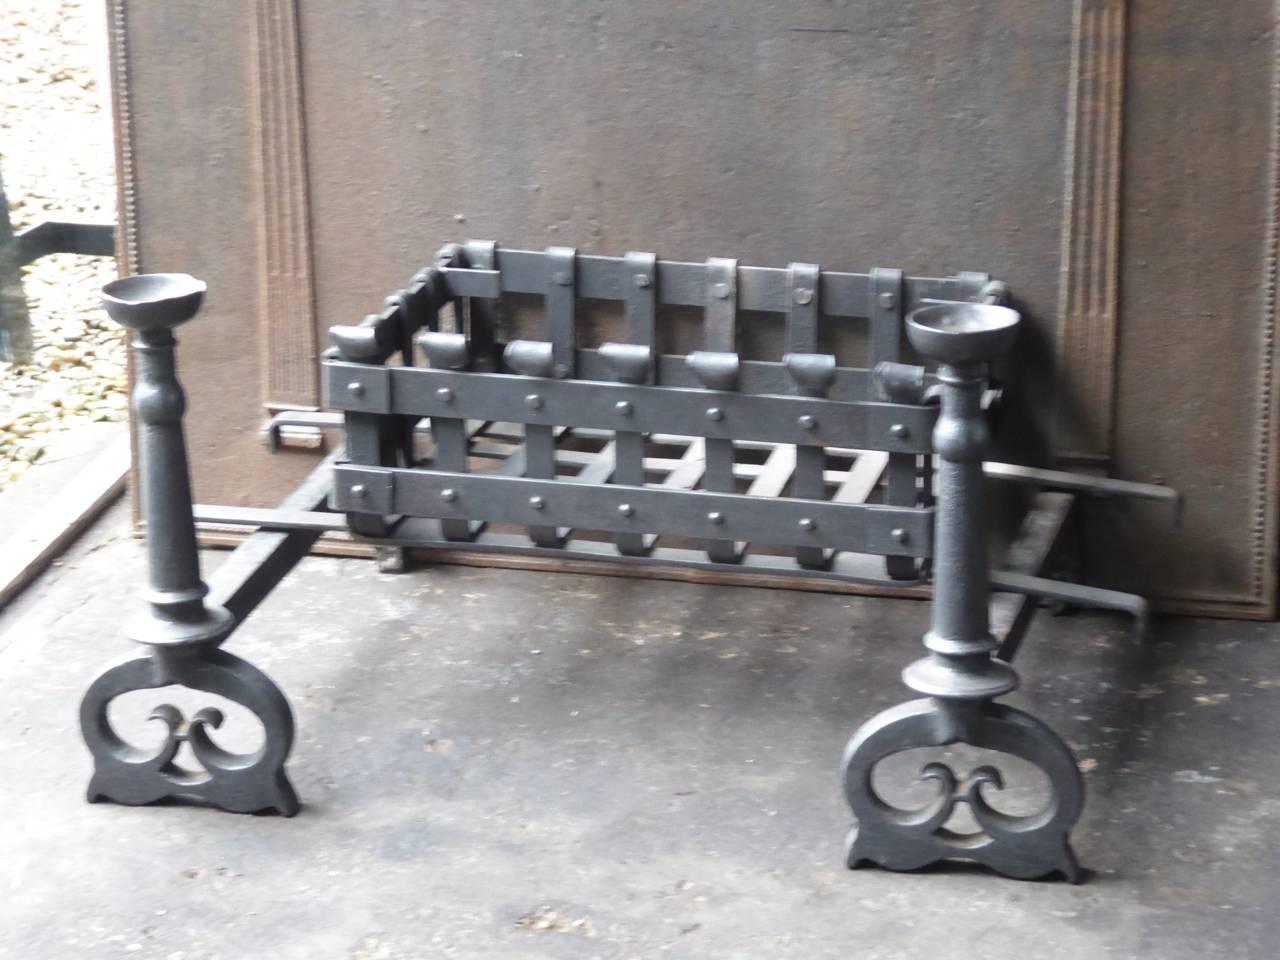 19th century English fireplace grate or fire grate made of wrought iron and cast iron.